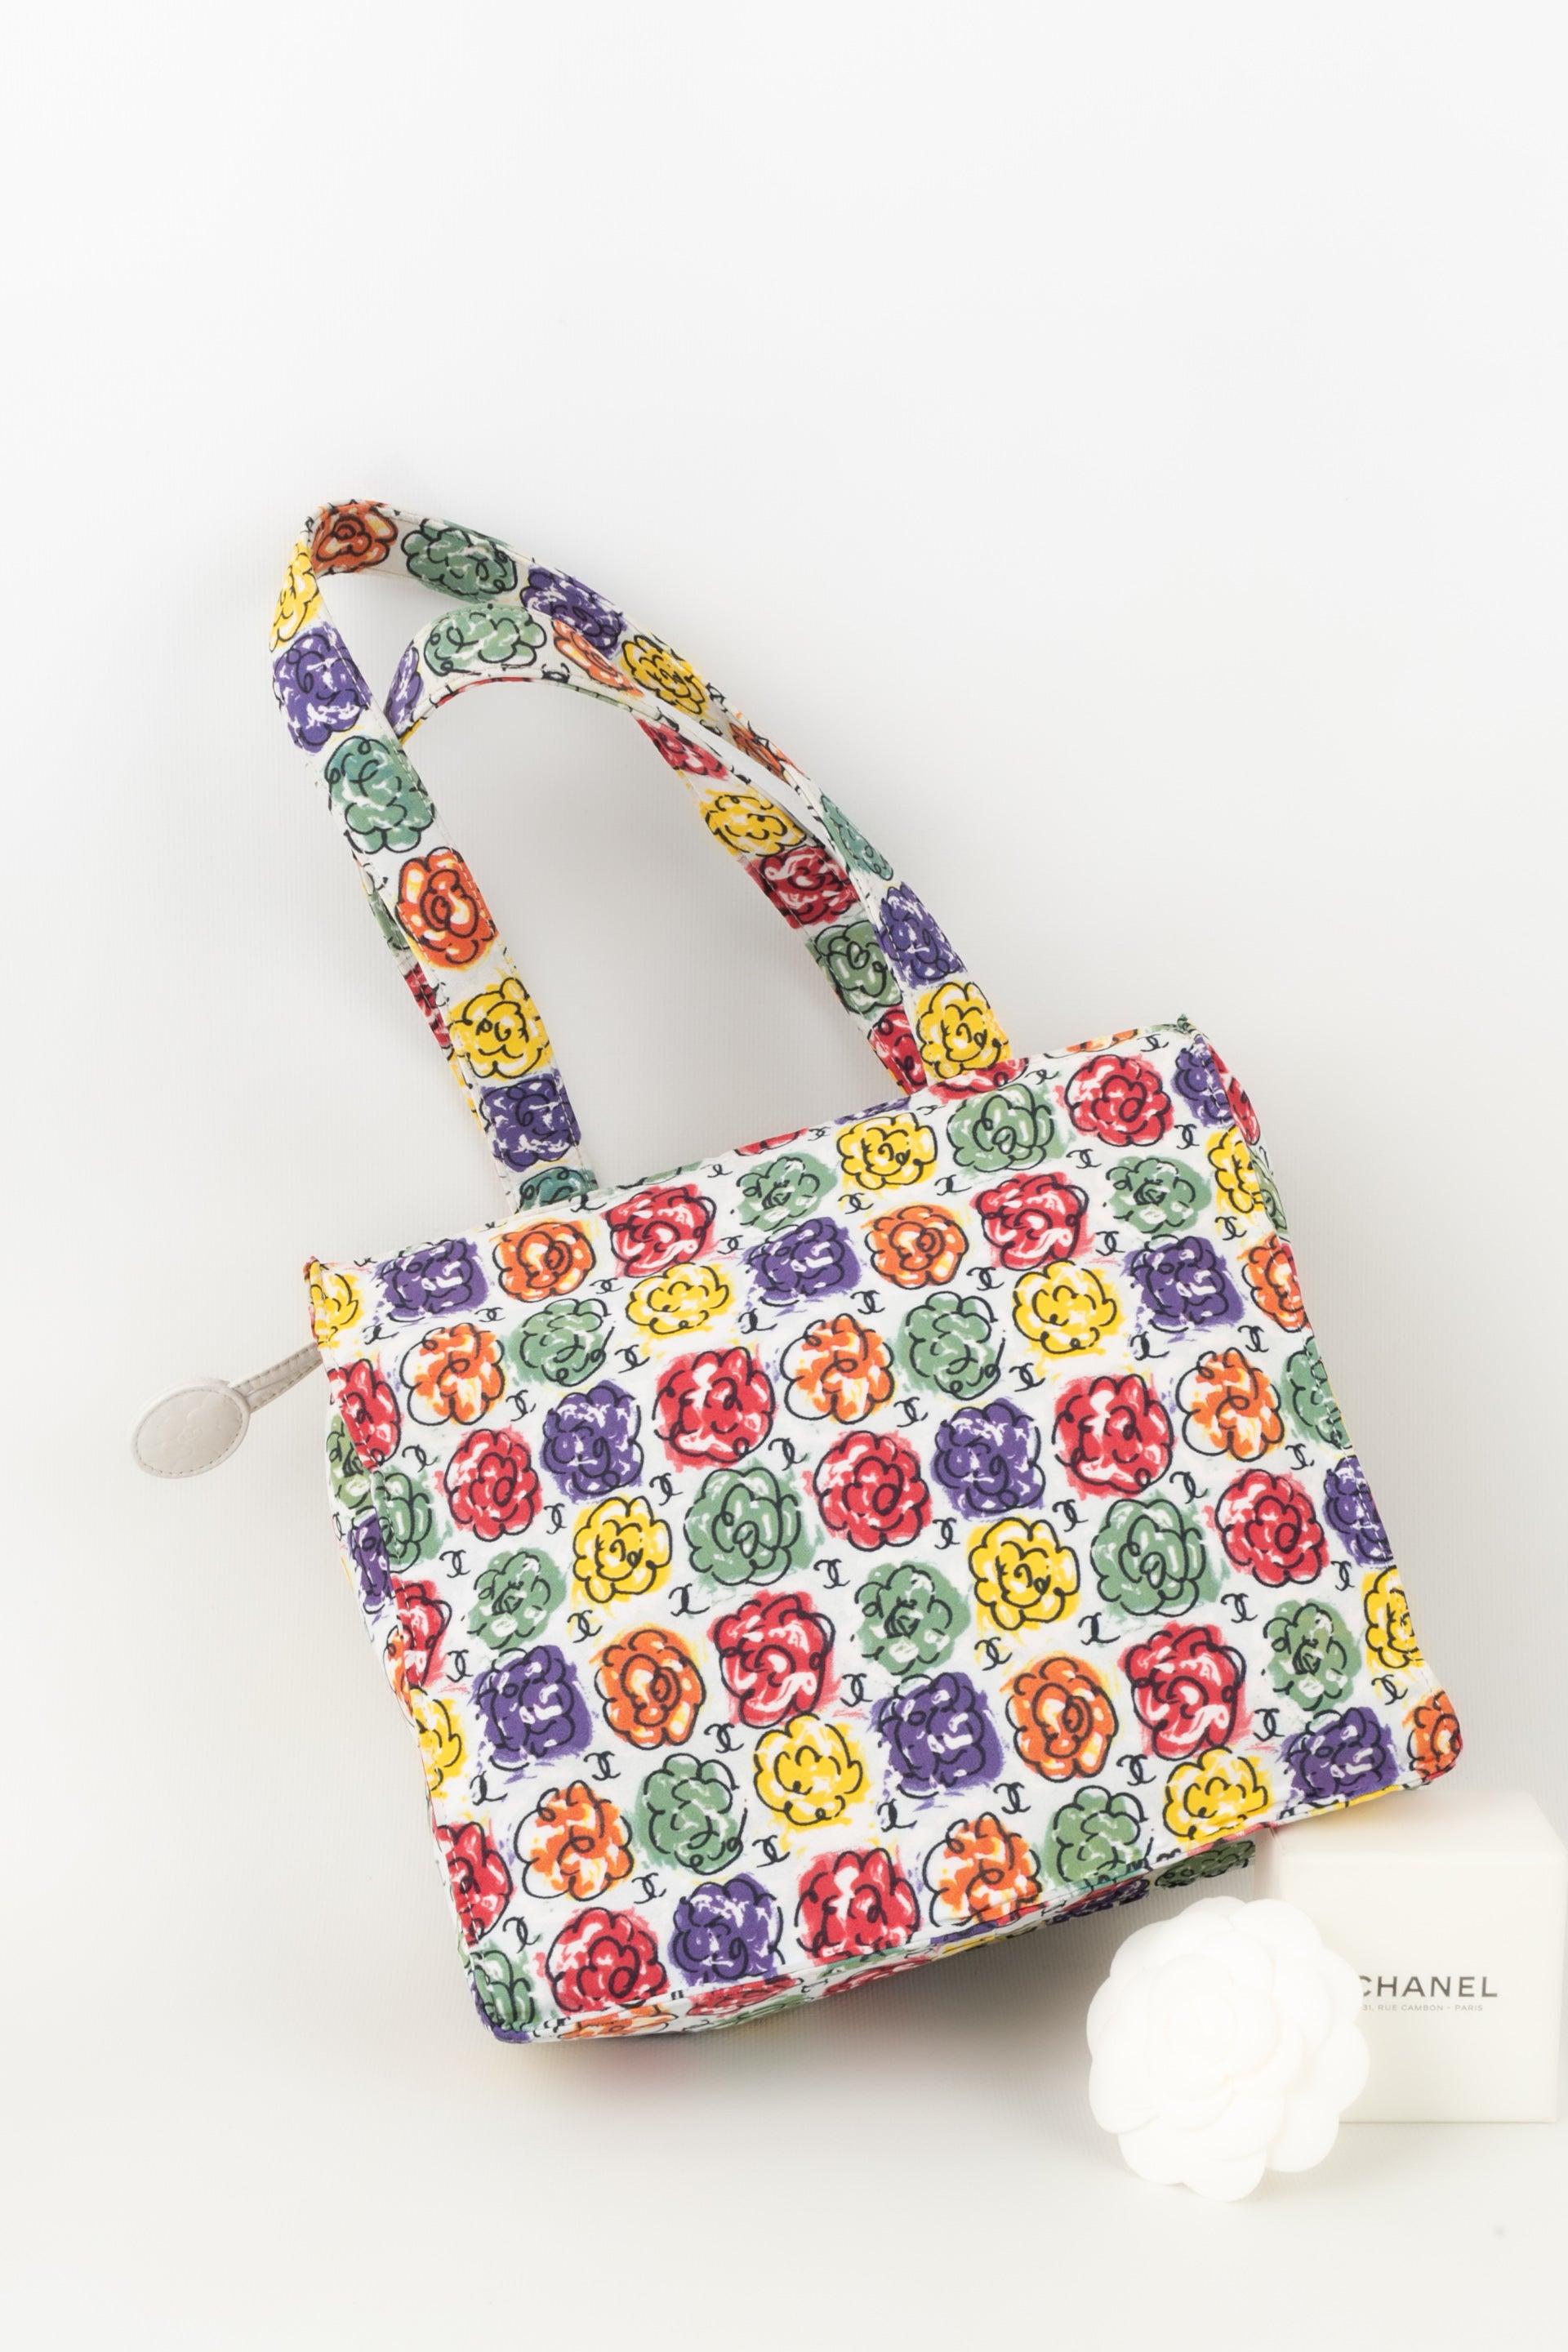 Chanel - (Made in France) Canvas bag printed with multicolored flowers on a white background. Sold with its serial number. 1997/1999 Collection.

Additional information:
Condition: Very good condition
Dimensions: Height: 21.5 cm - Length: 24 cm -